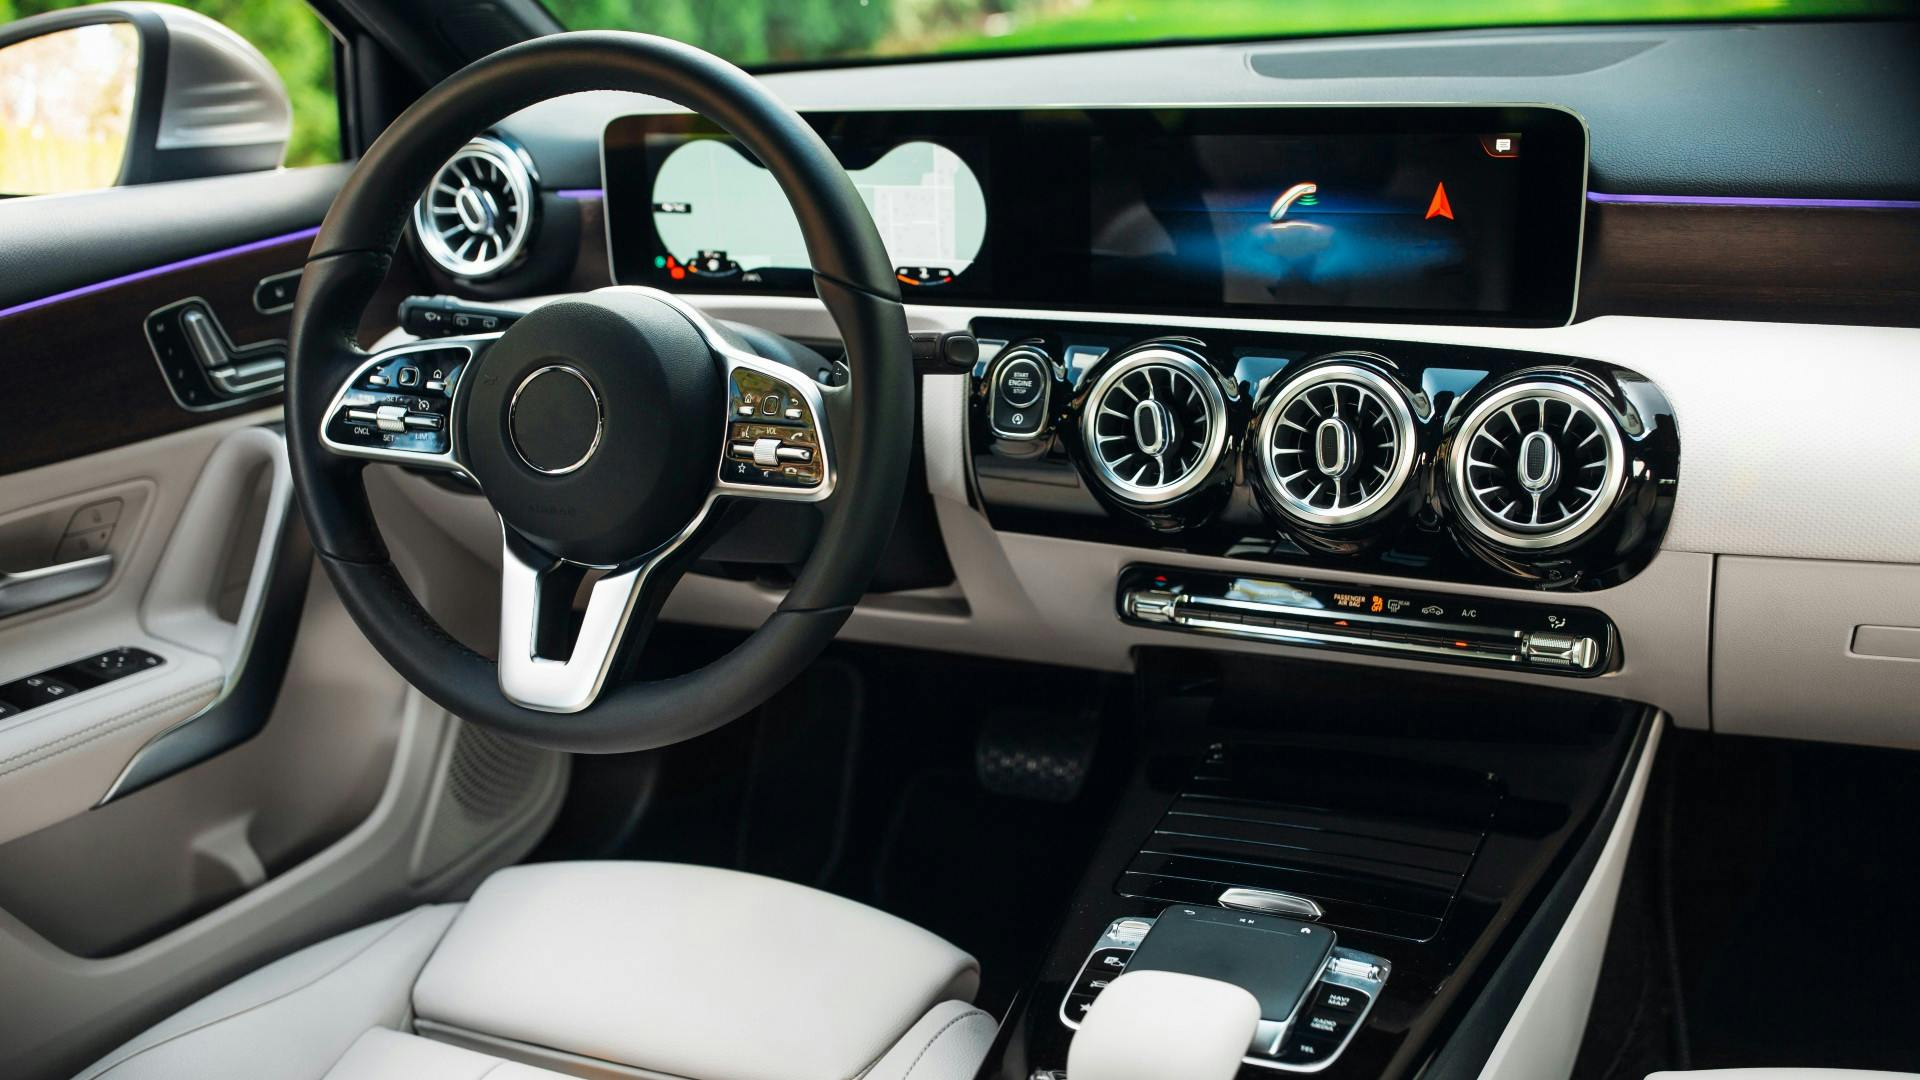 Interior of a software-defined vehicle that has features and functions primarily enabled through software on the dashboard display.